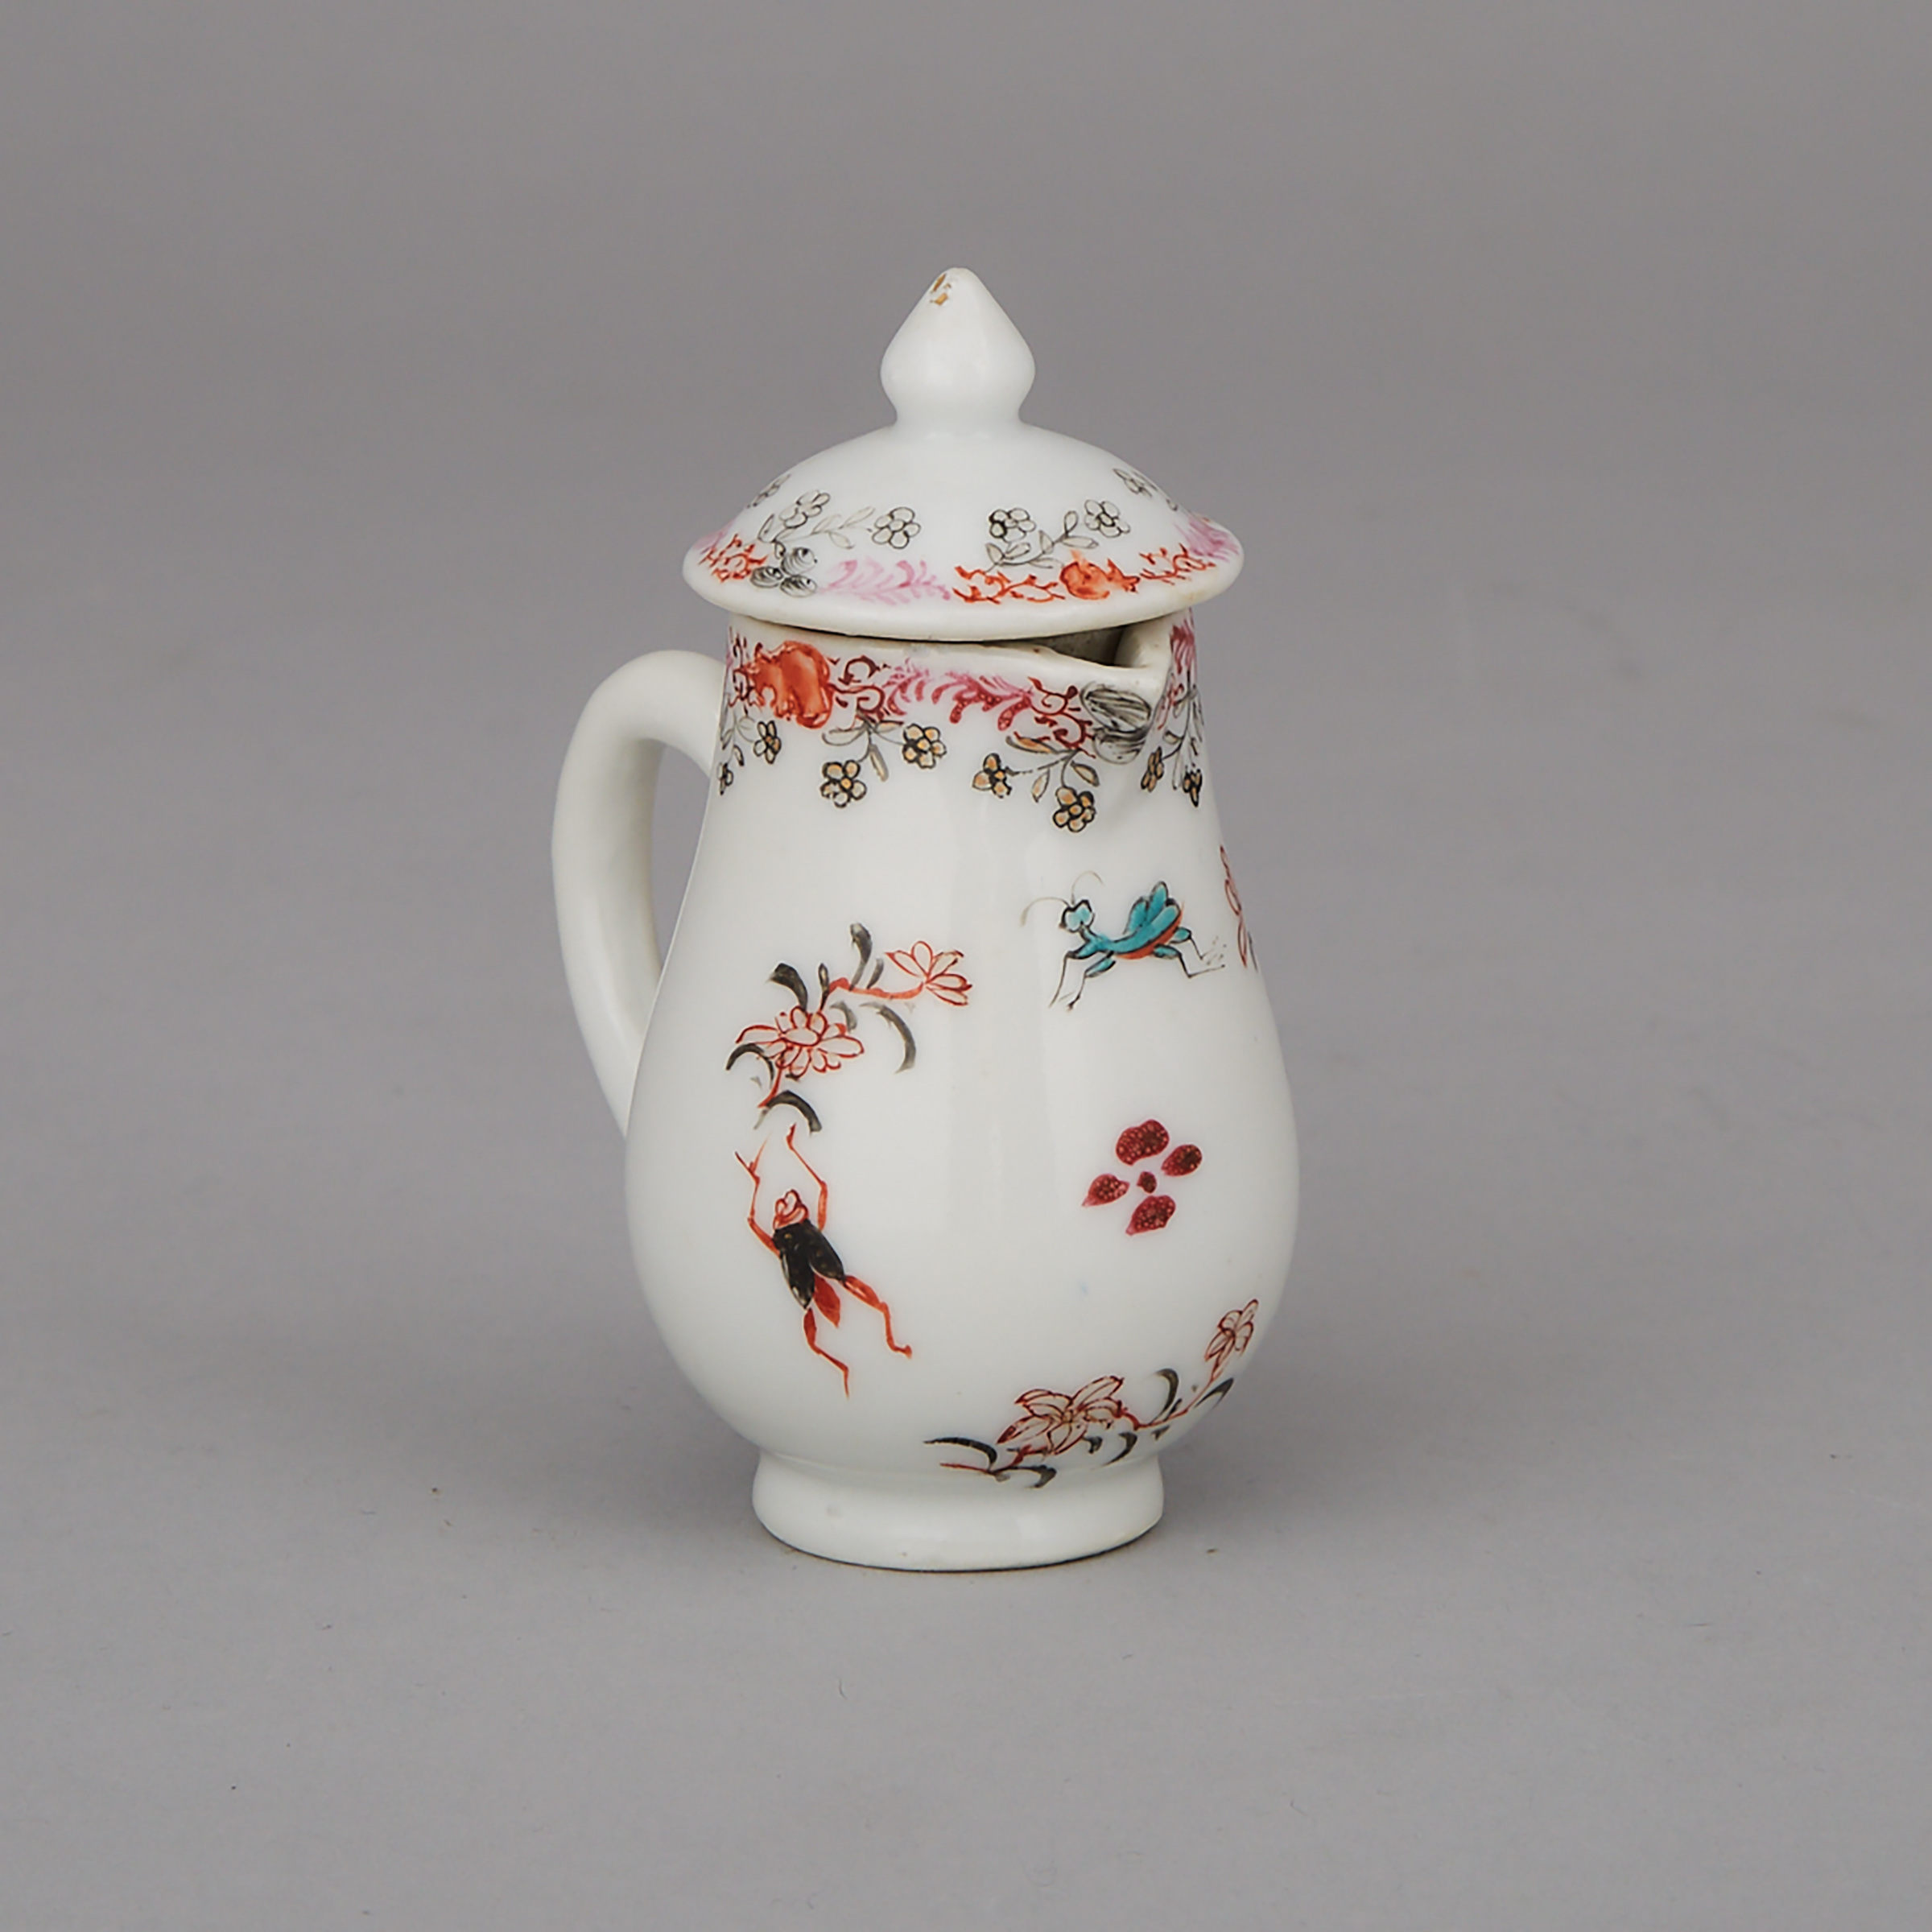 Chinese Export Porcelain Covered Cream Jug, mid-18th century